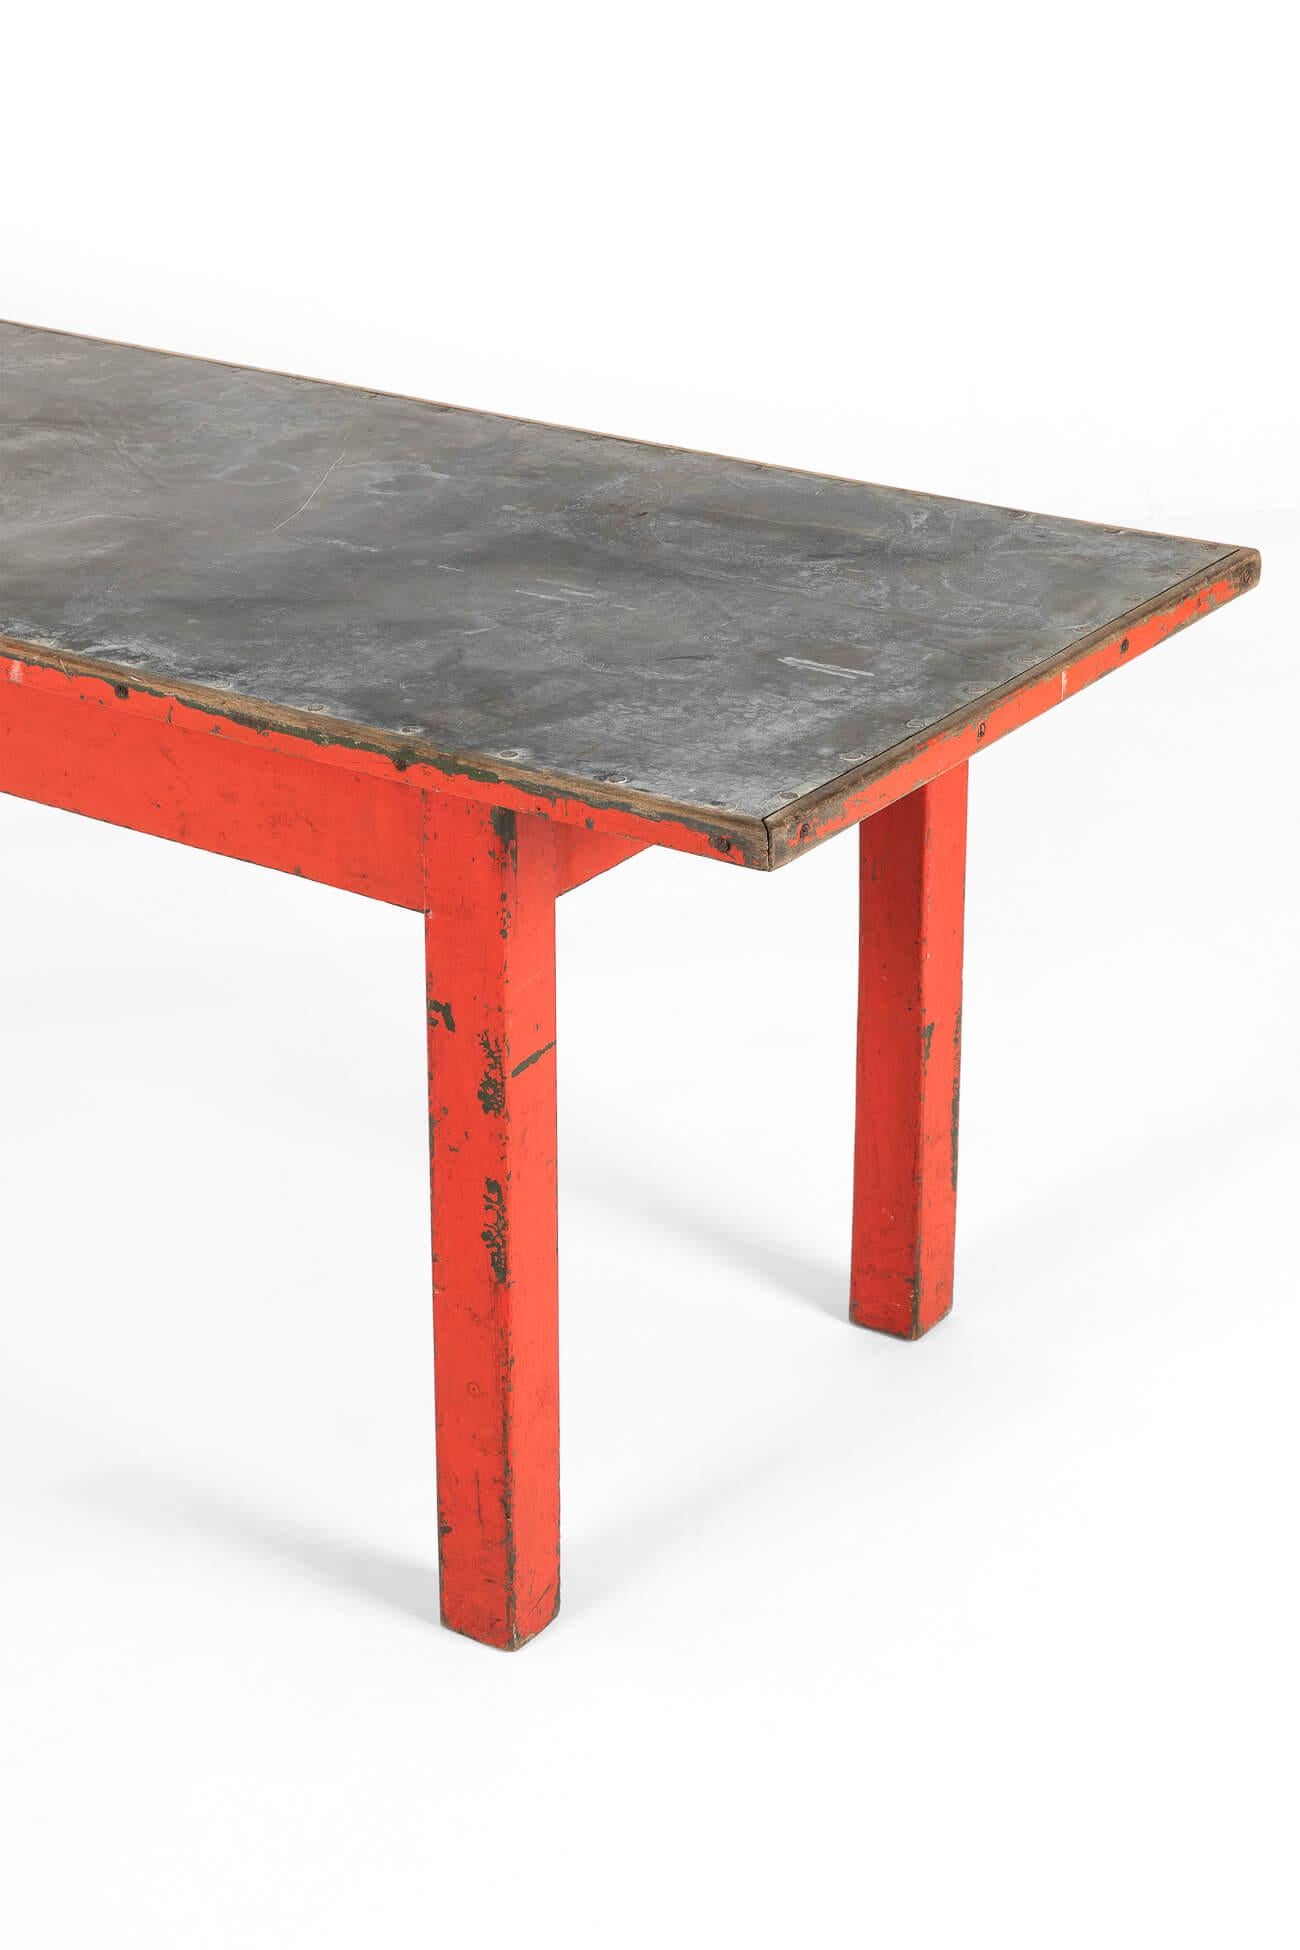 Hand-Crafted Zinc Top Table by C.W.S LTD